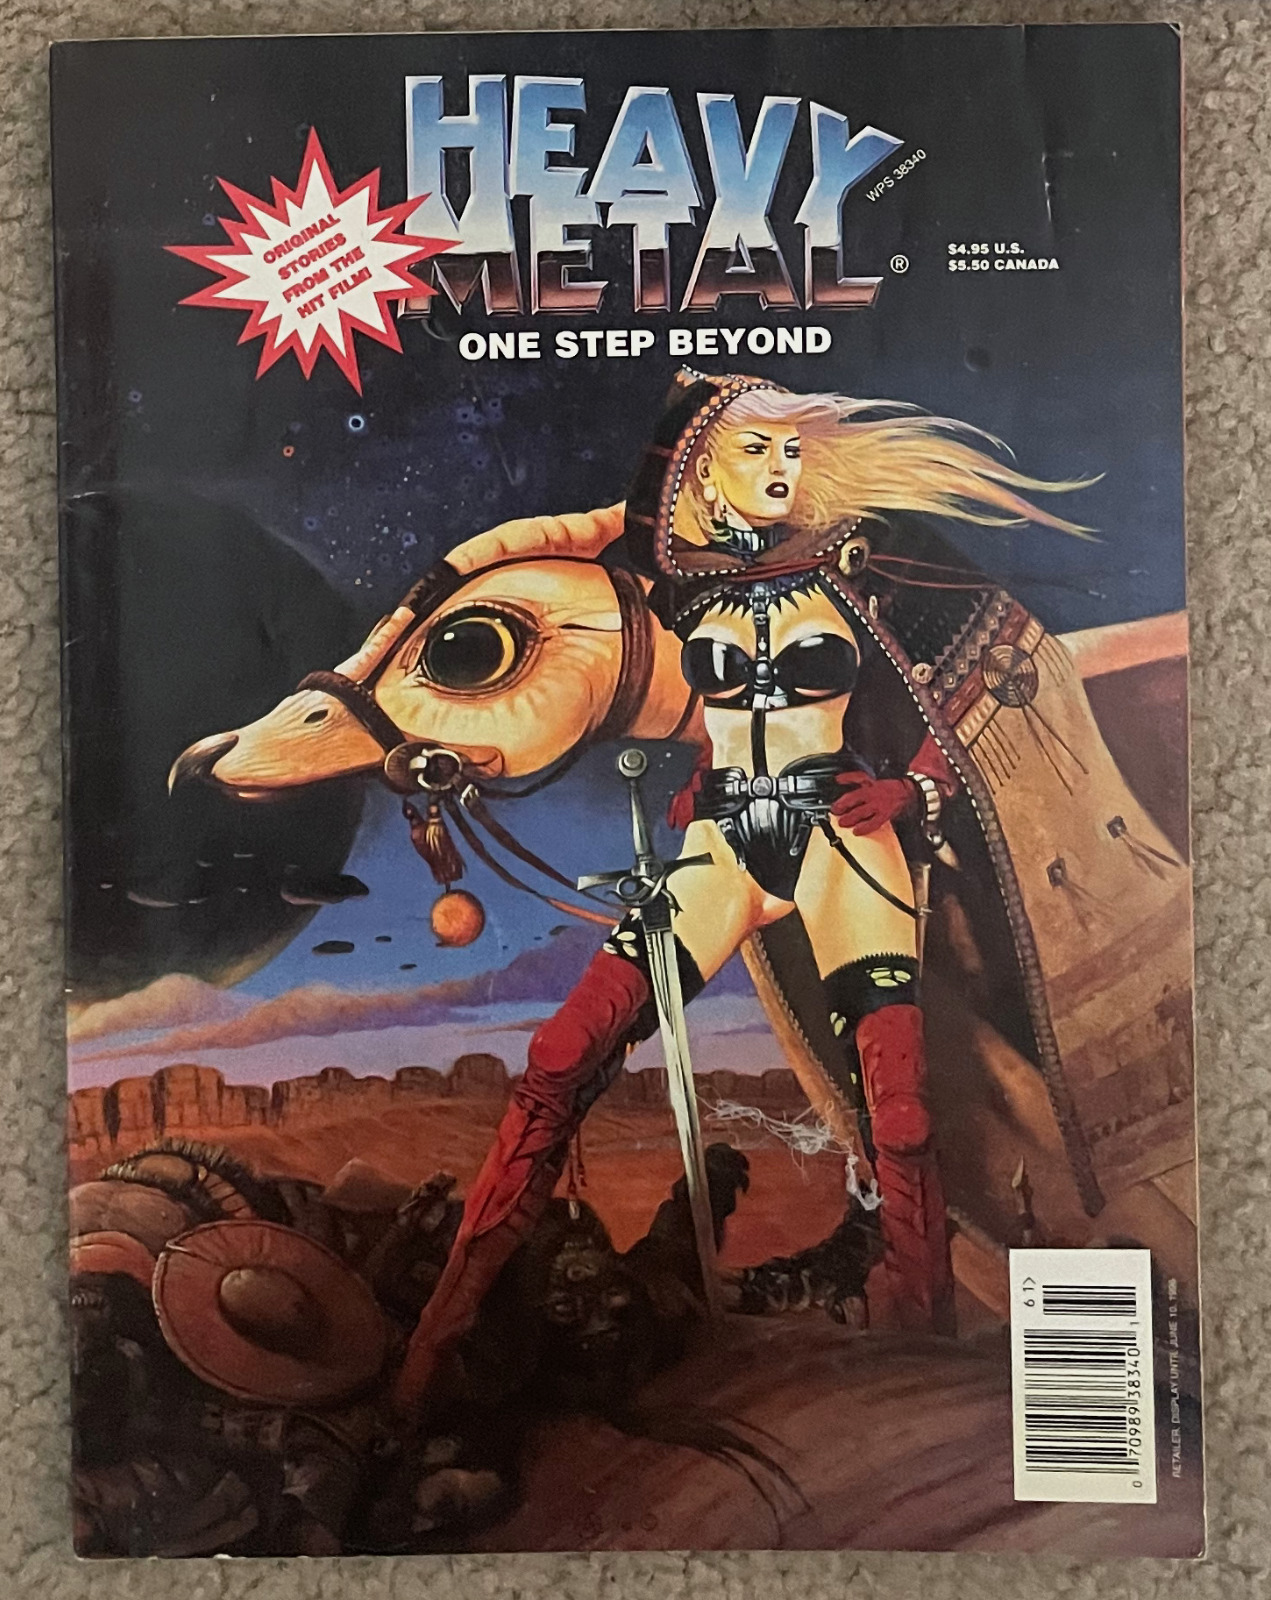 One Step Beyond Heavy Metal Magazine Vol 10 #1 Illustrated Fantasy 1996 Special